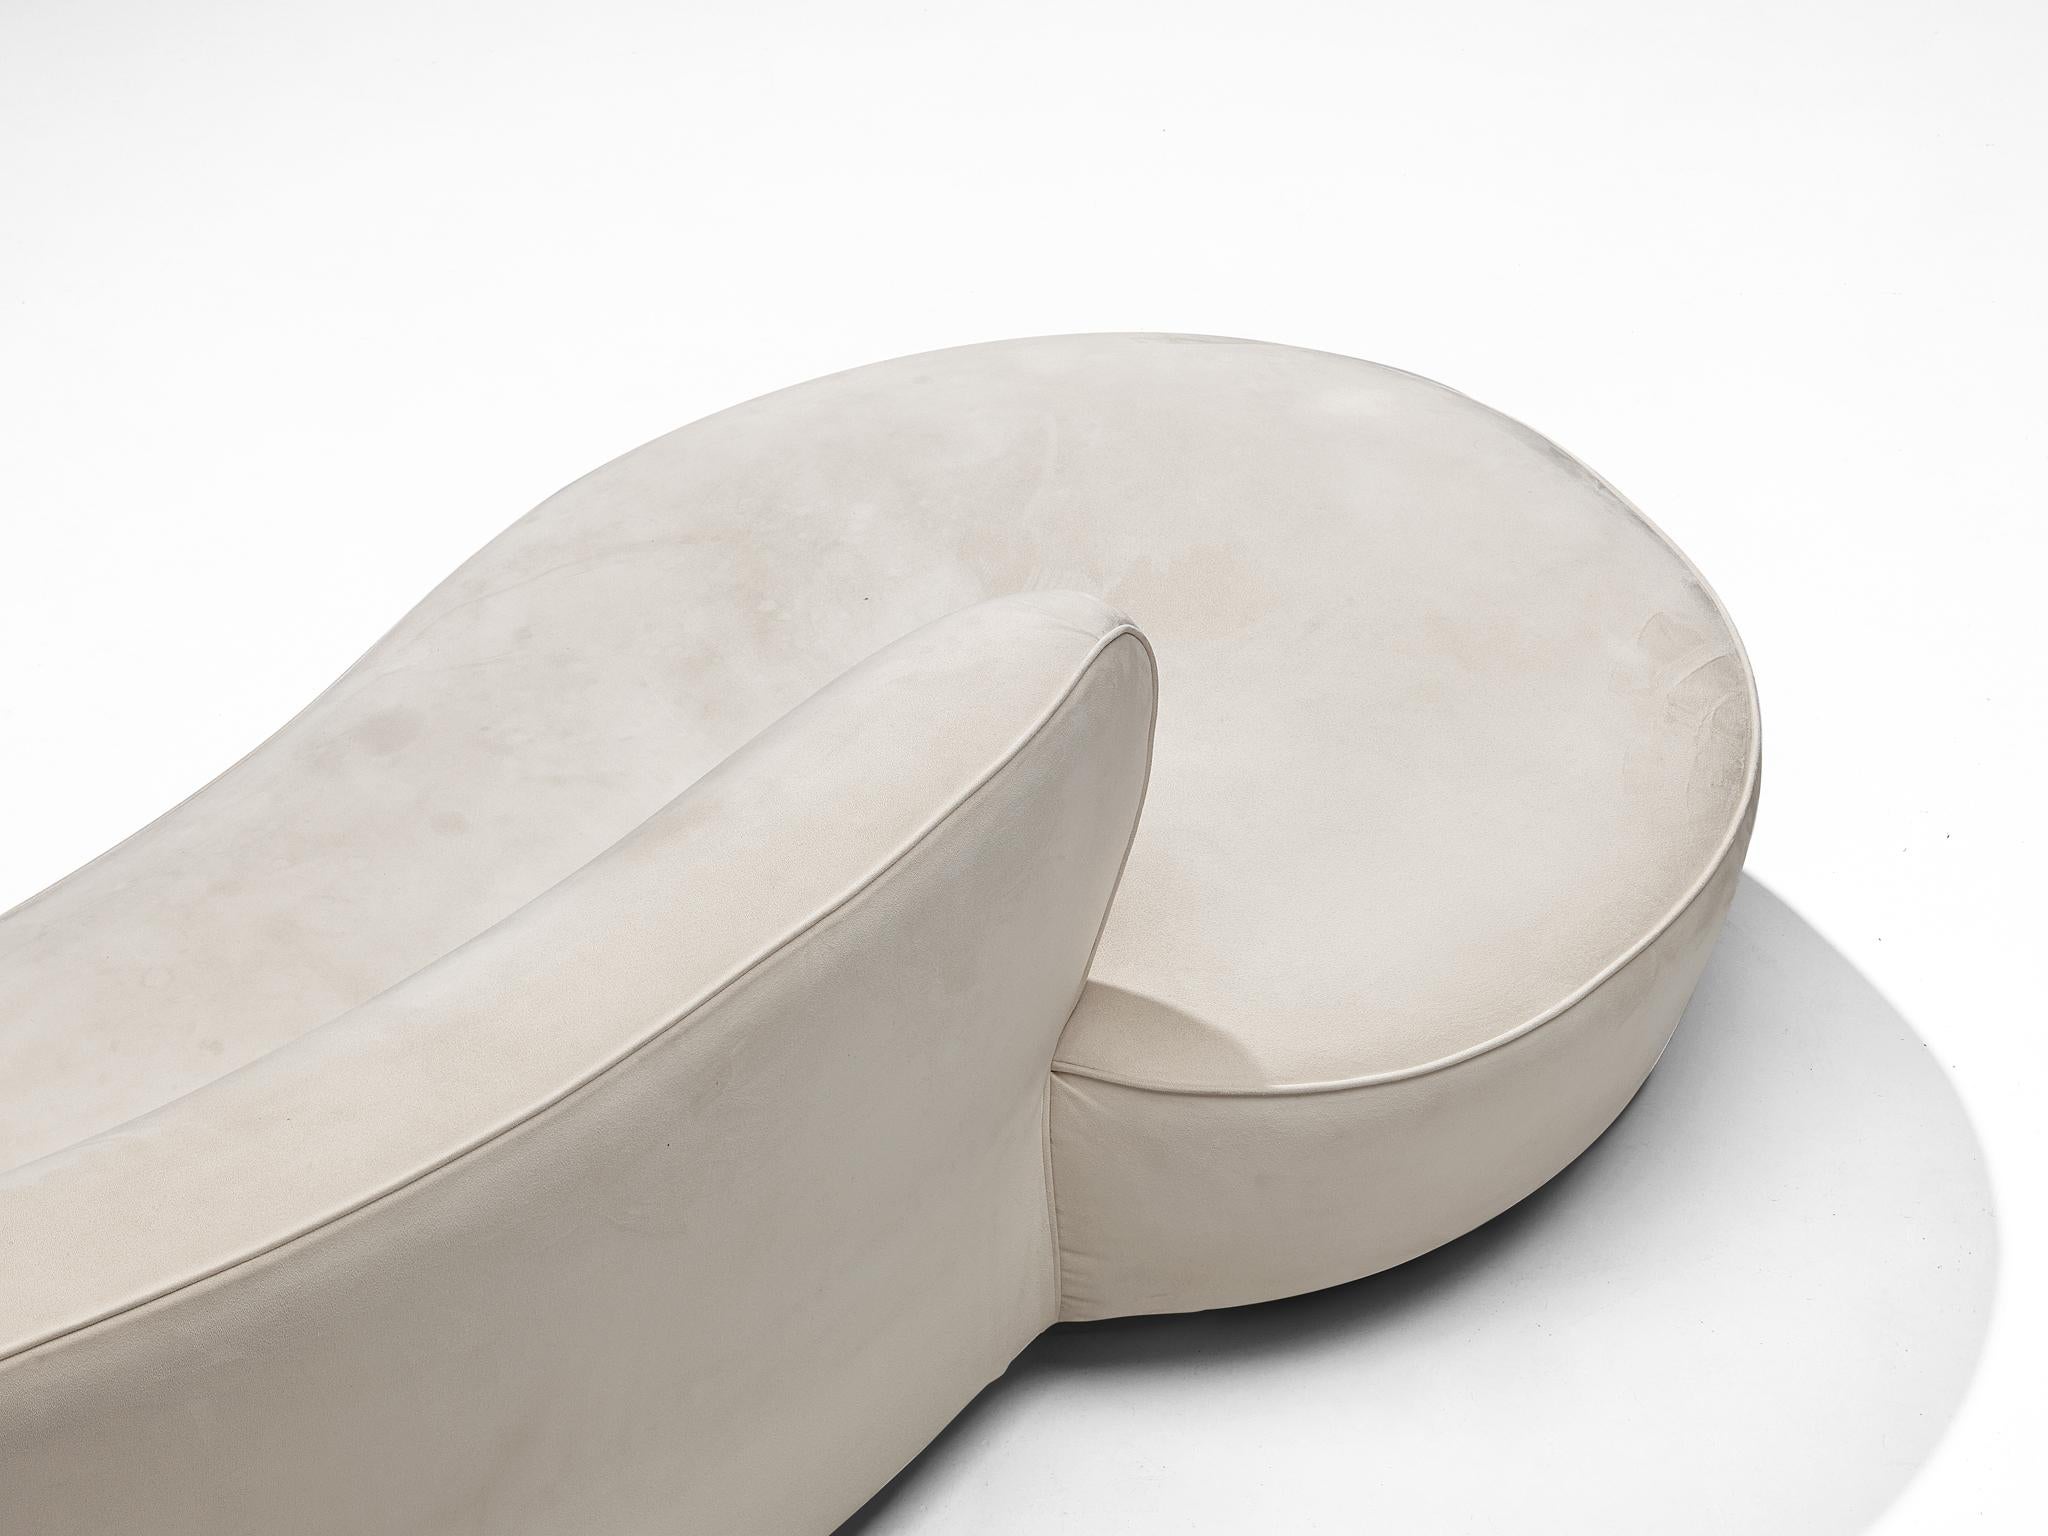 Iconic Vladimir Kagan ‘Serpentine’ Sofa and Ottoman in Off-White Upholstery 2